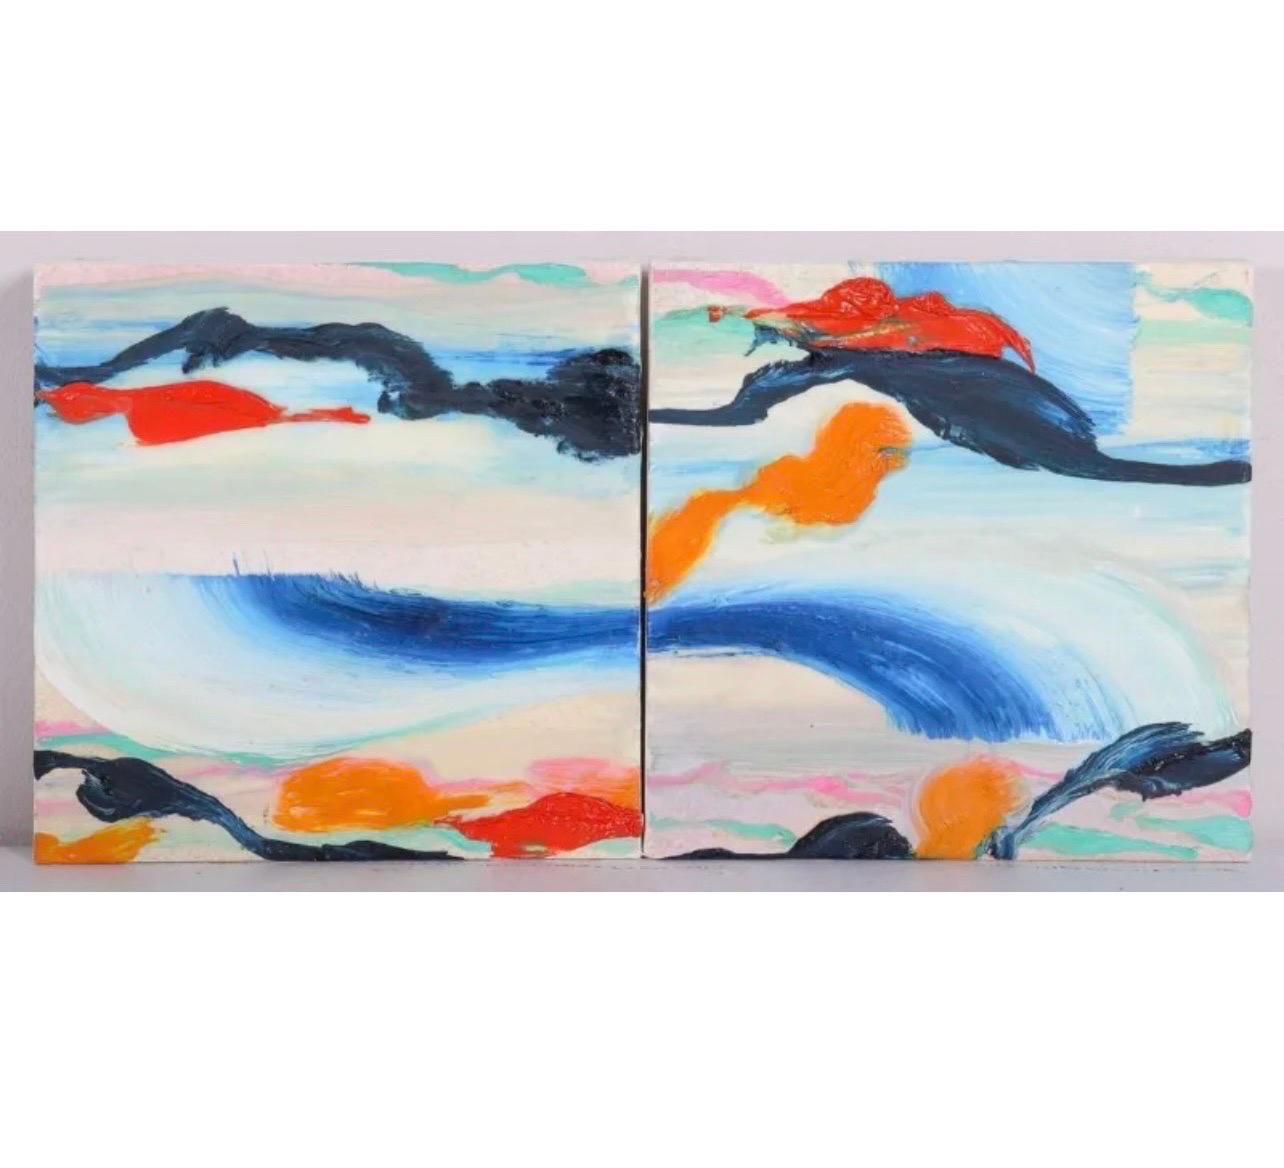 Surrealist Abstract Painting Pair, Martyn Jones British Color Diptych Painting